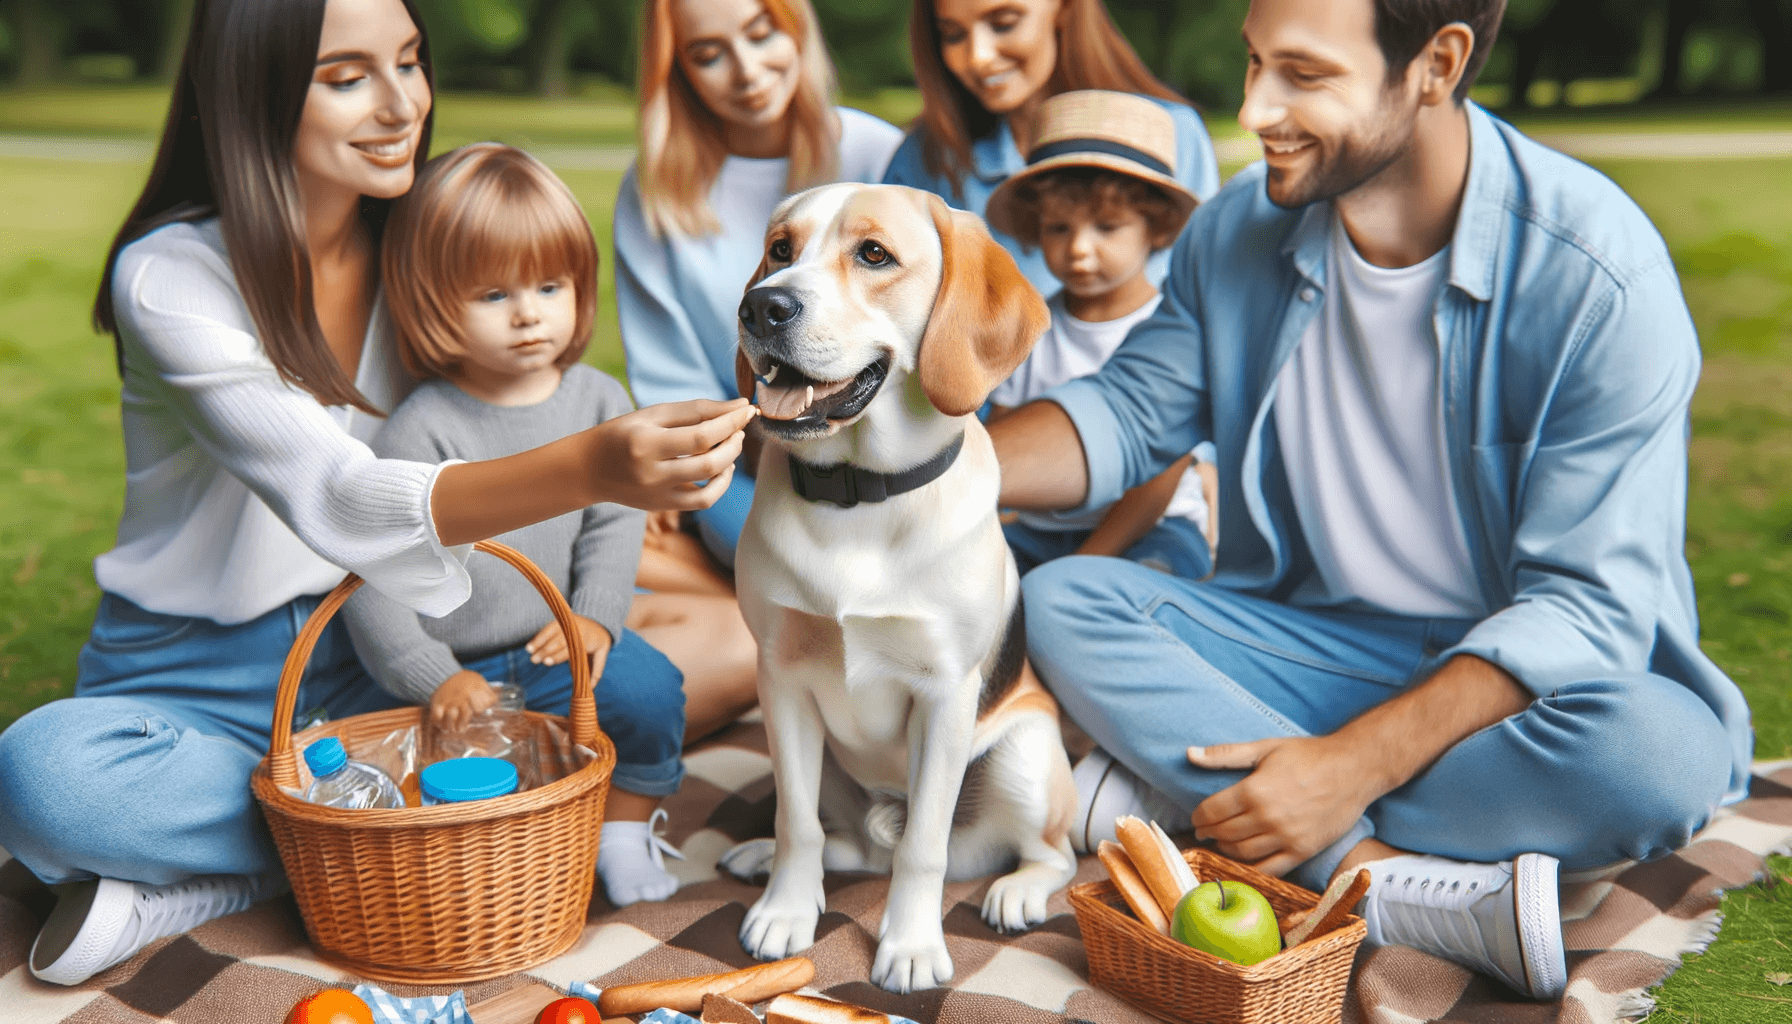 A Lab Hound Mix fitting right in with a family picnic, proving it's as adaptable as it is adorable